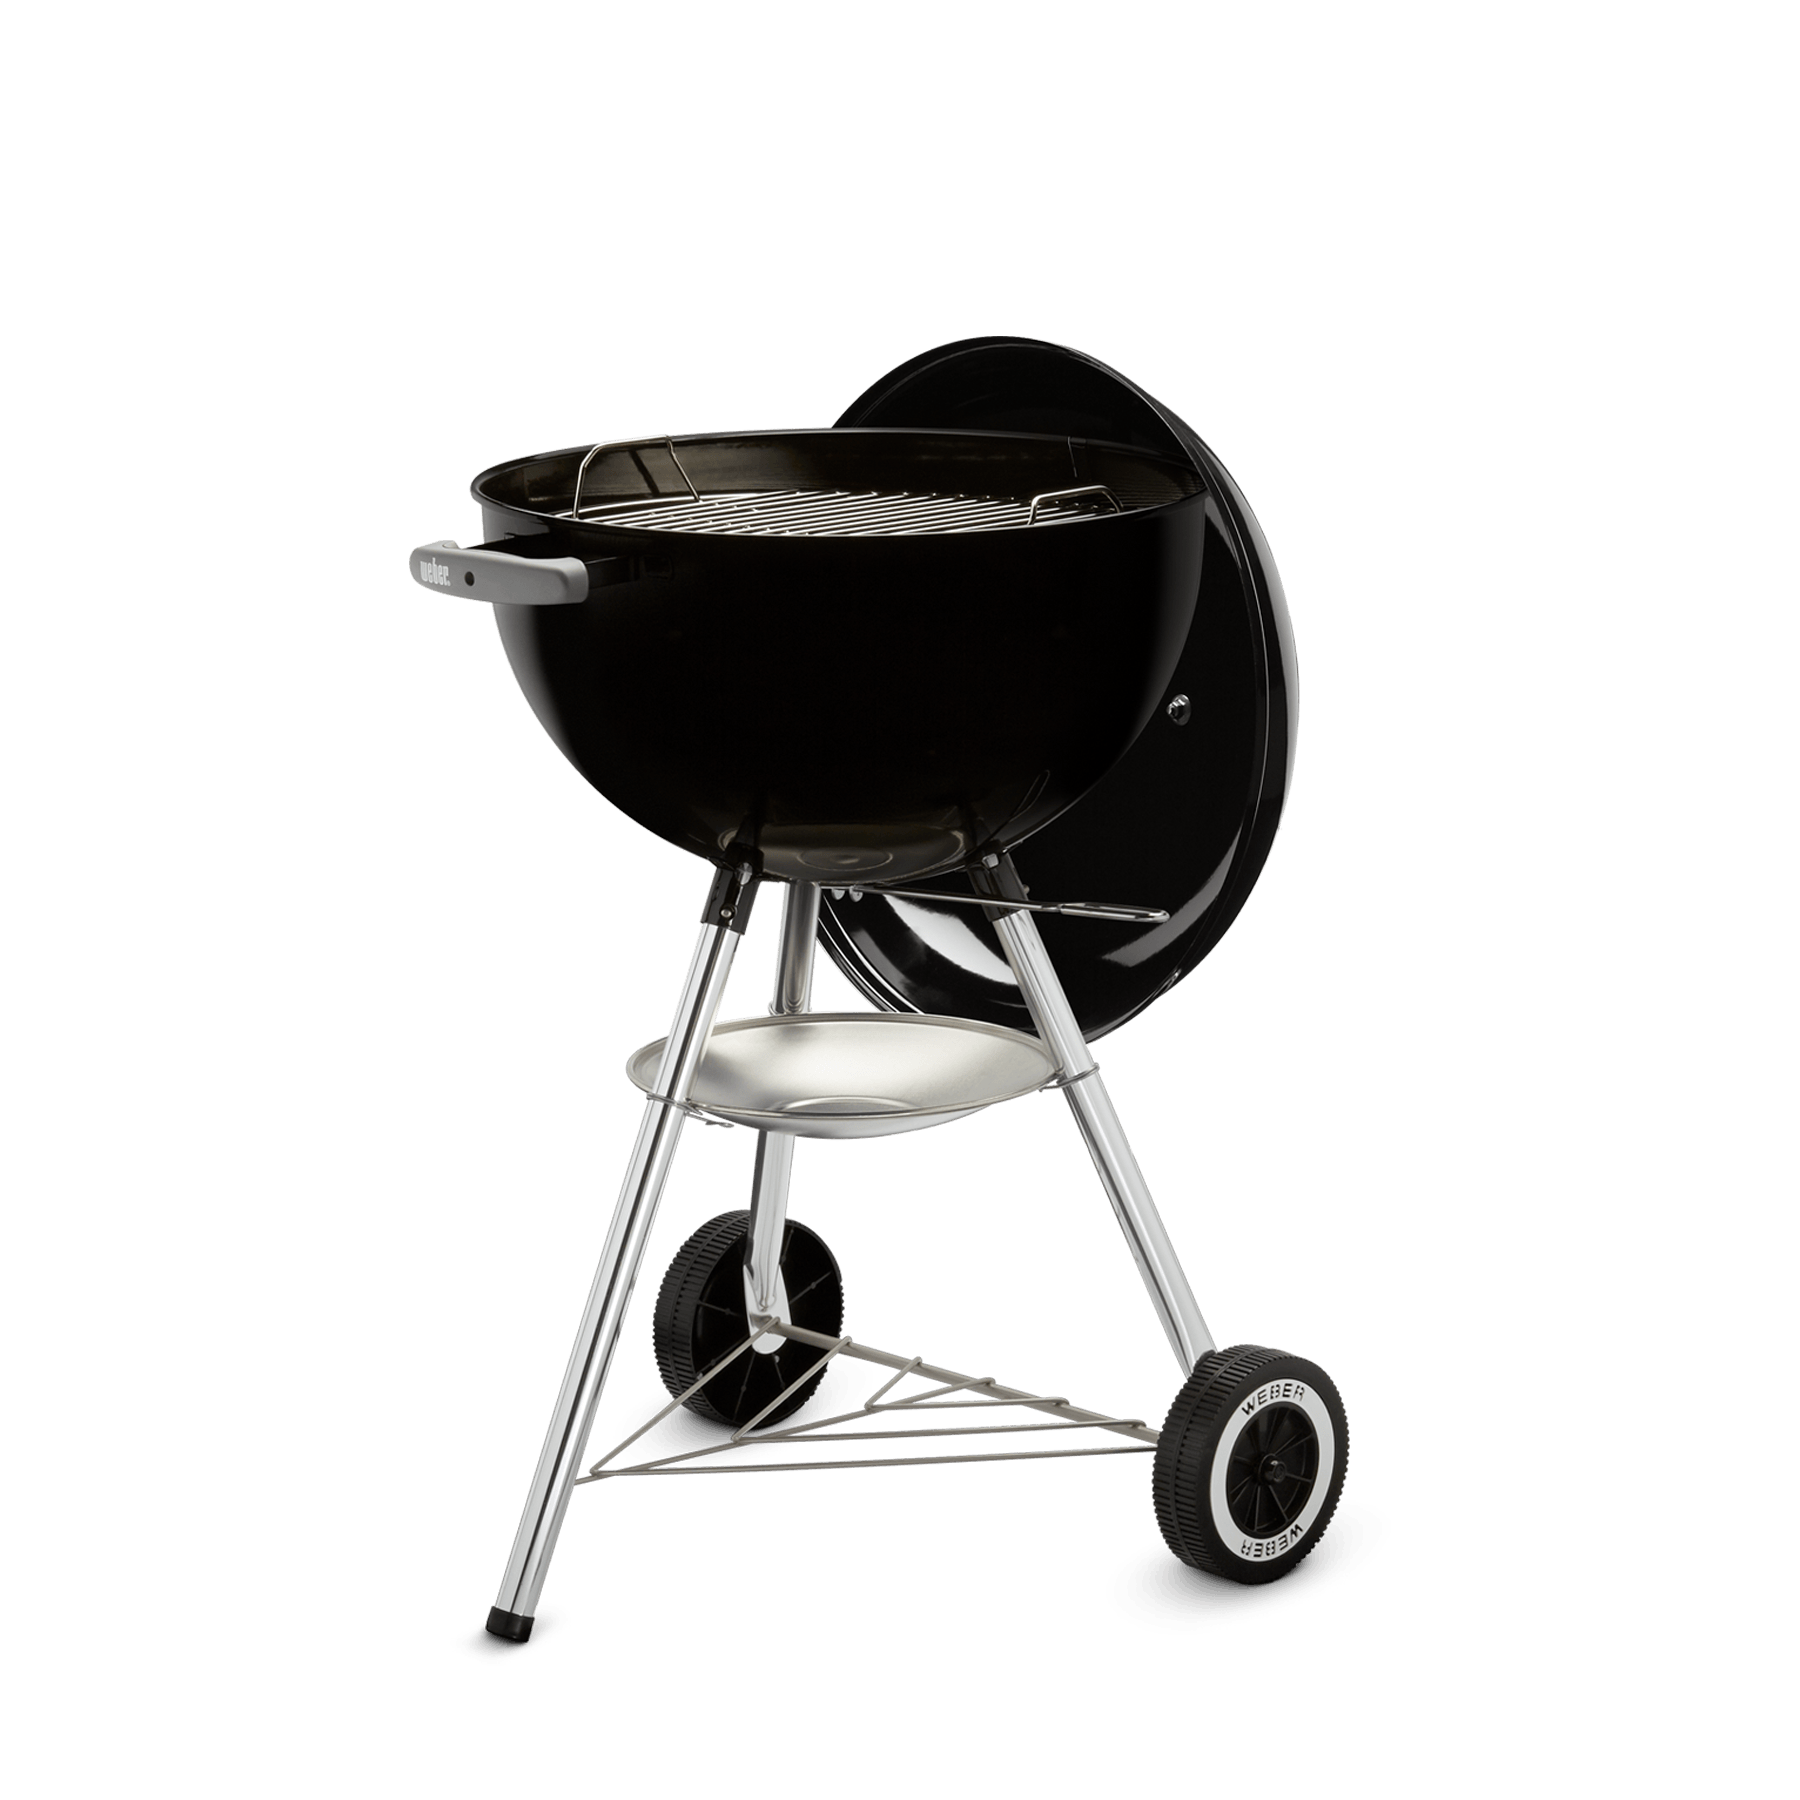 Charcoal Grill BBQ Barbecue Outdoor Fire Cooking Weber Original Kettle 18-Inch 